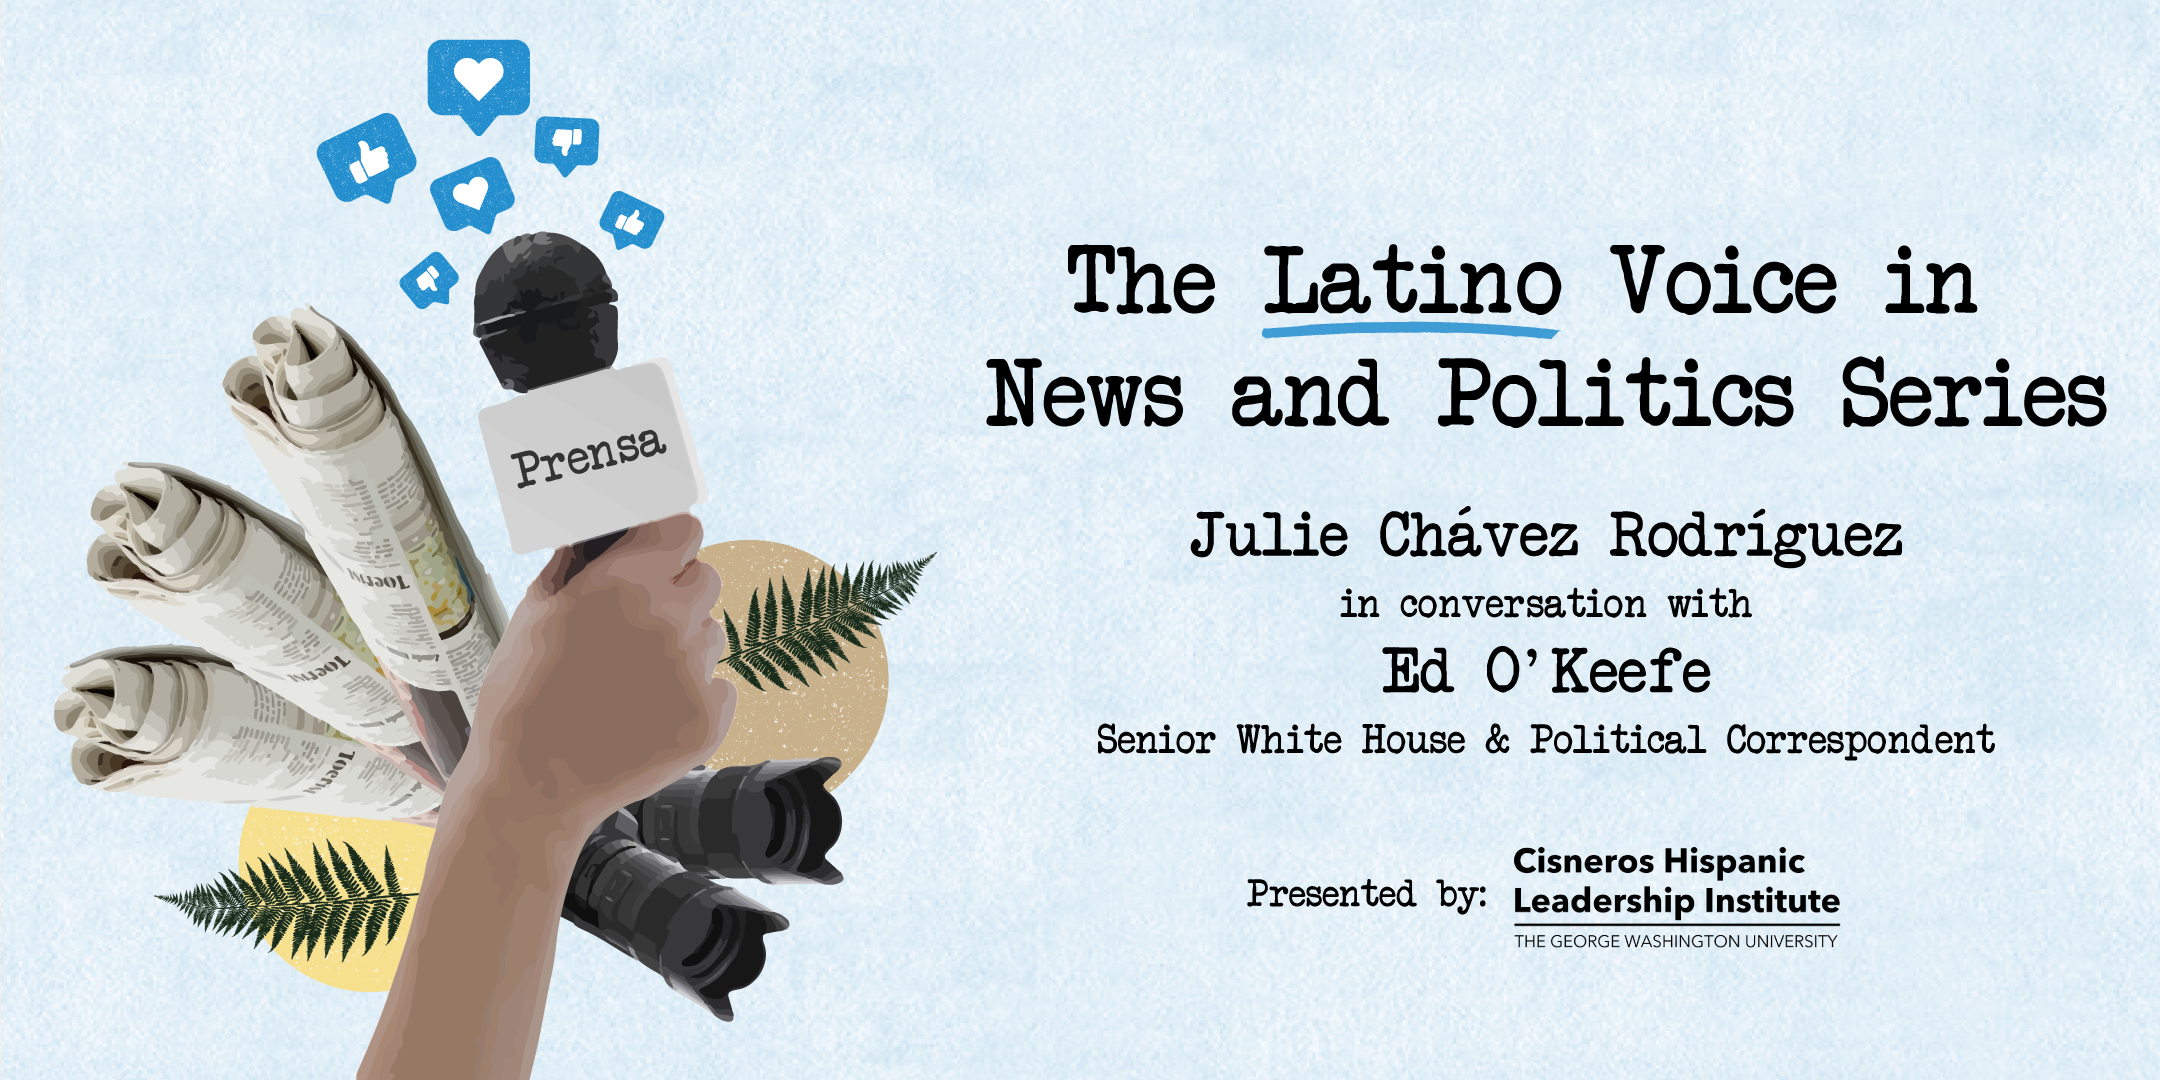 The Latino Voice in News and Politics